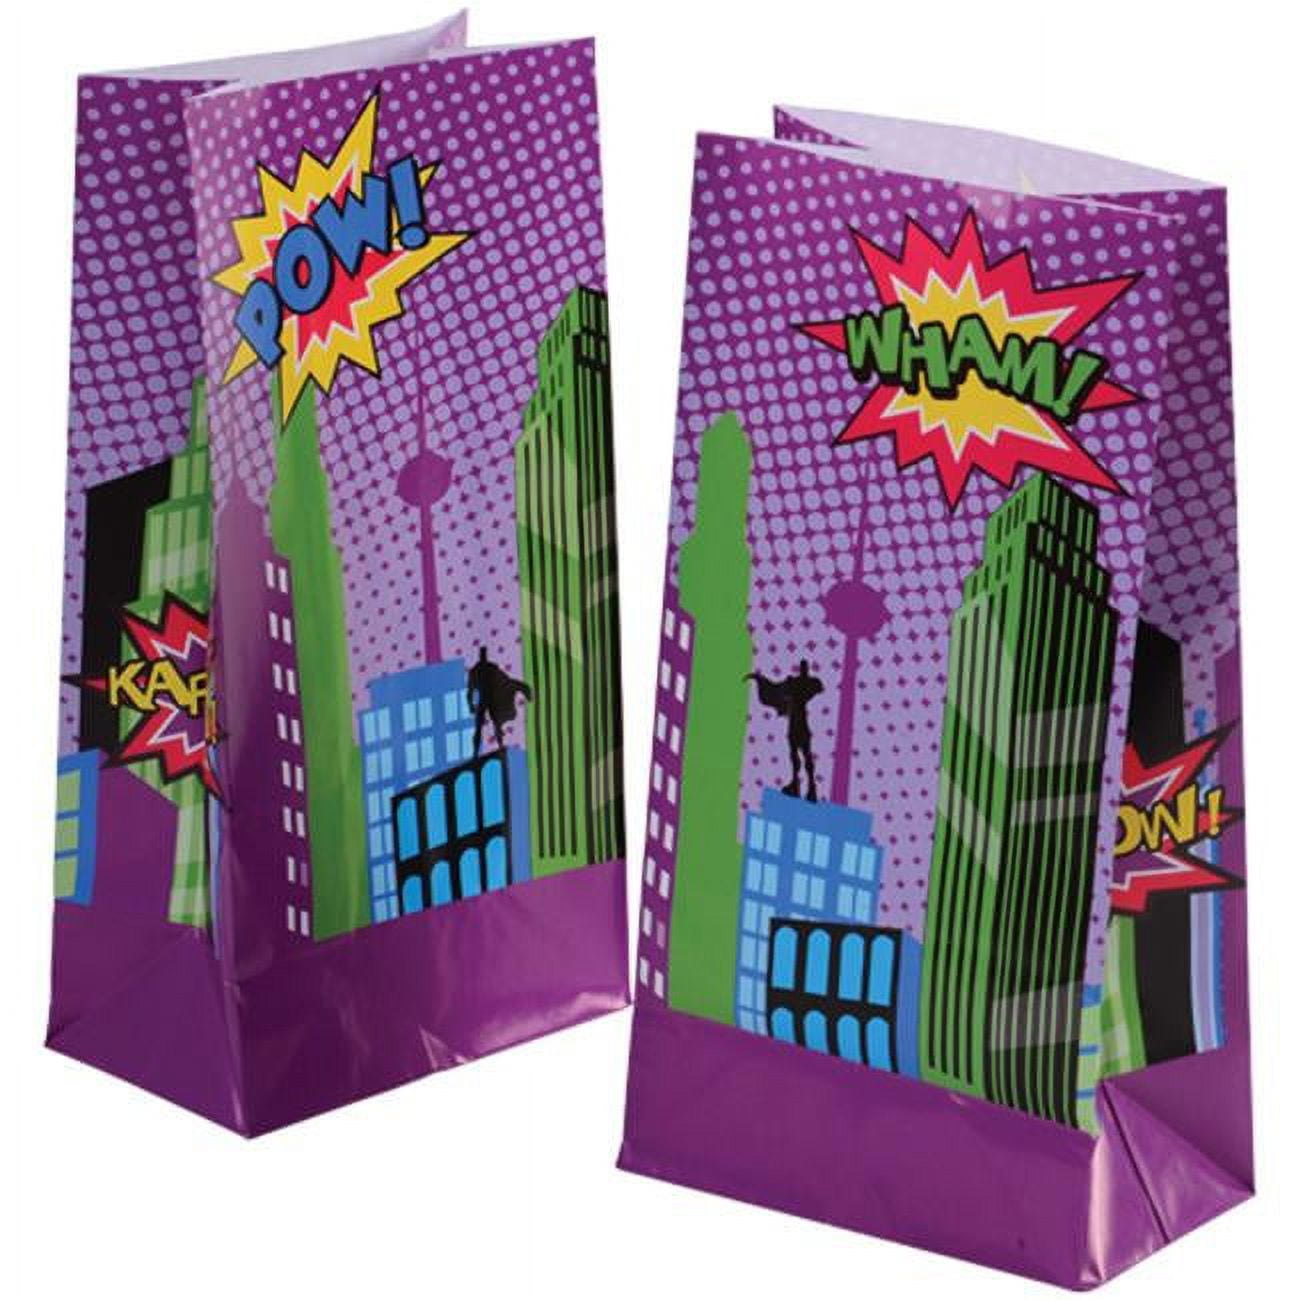 50 Pcs Kids Party Favors Bags, Birthday Goodie Candy Bags, Party Goody Favor Bags for Kids Birthday, Goodie Bags for Kids Birthday Party, Loot Bags